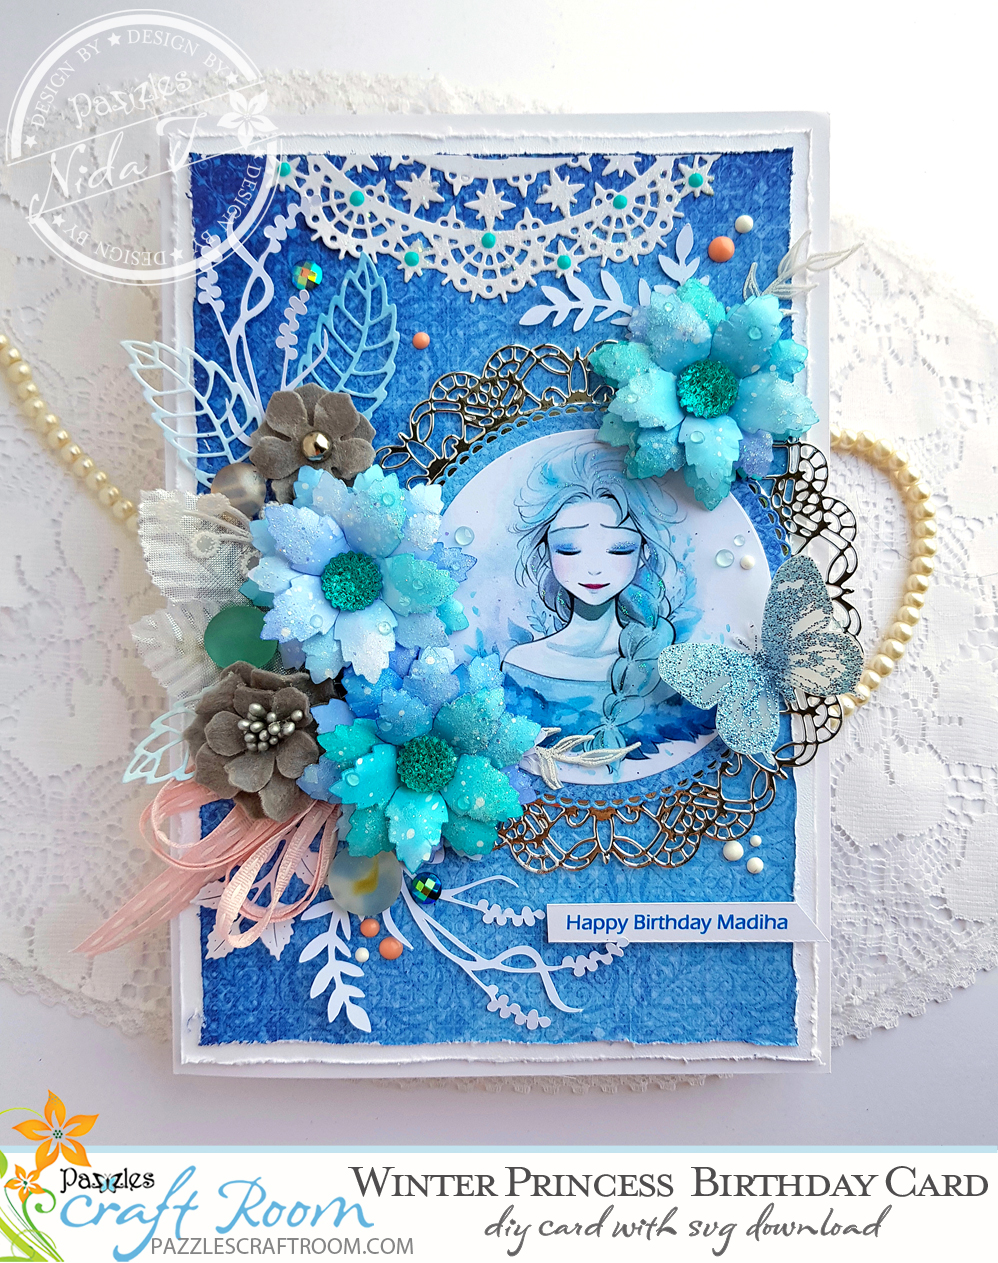 DIY Winter Princess Birthday Card with SVG download - Pazzles